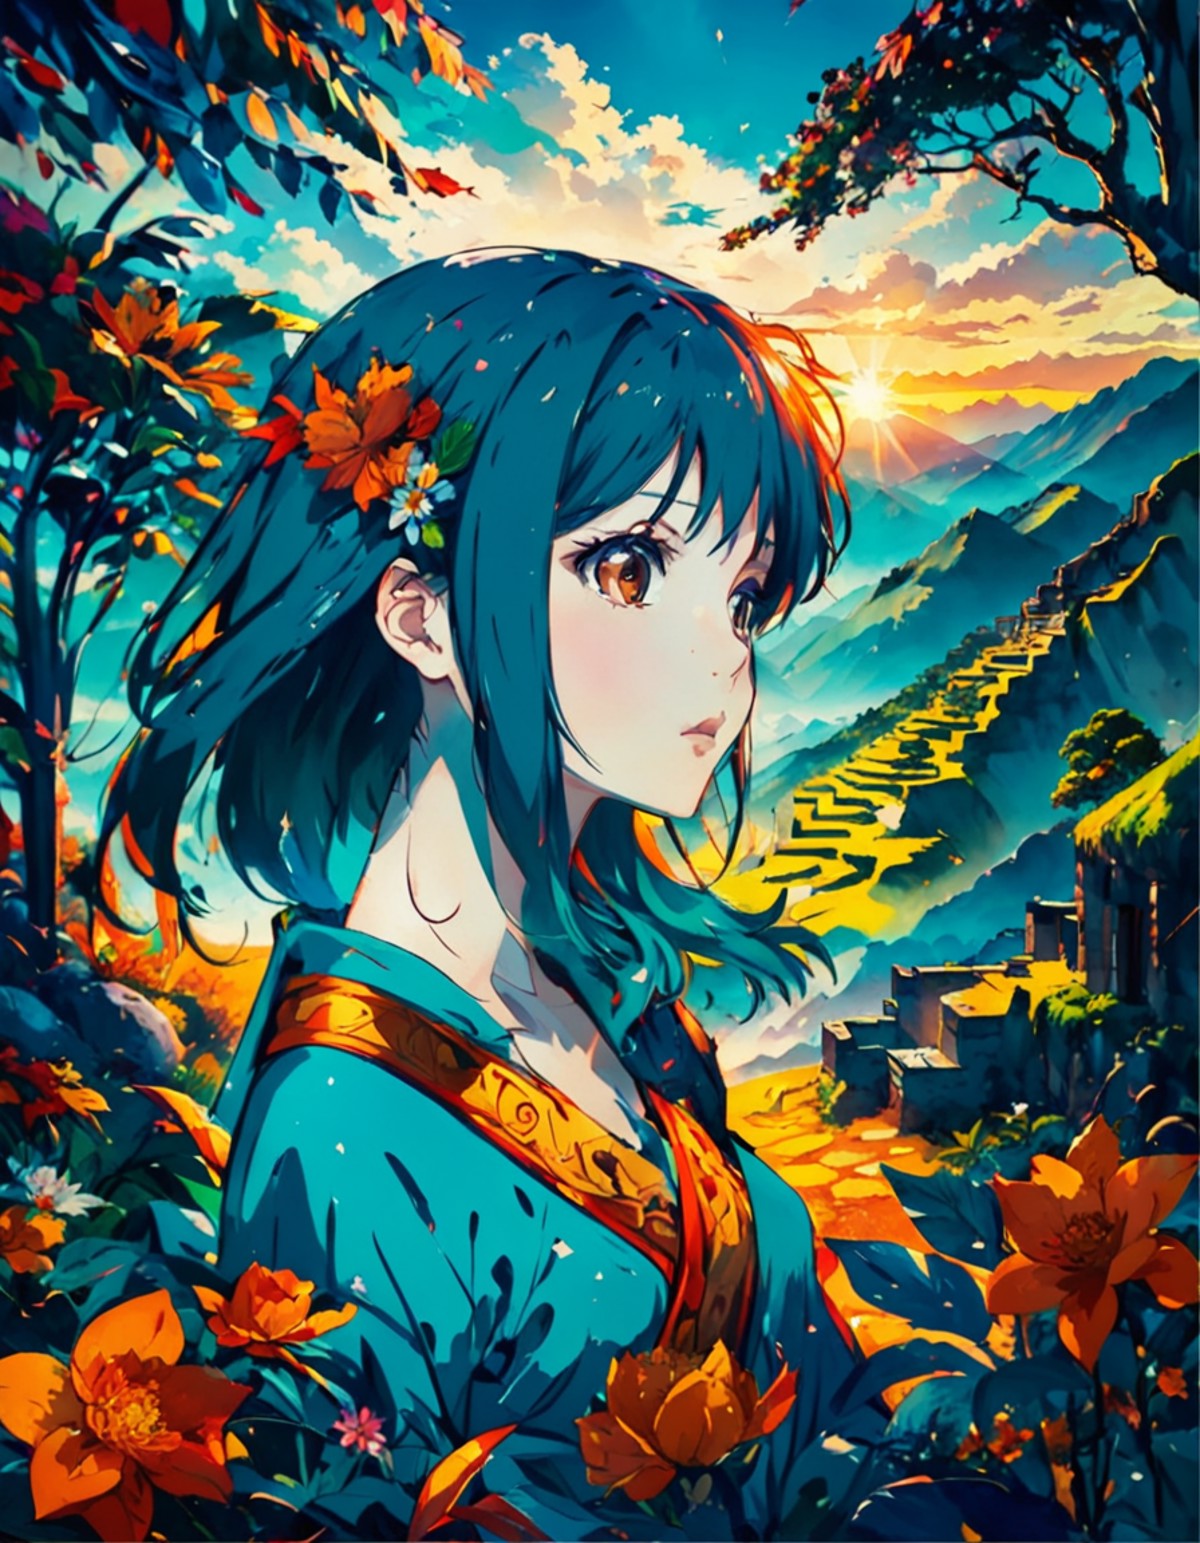 anime artwork Dark, Floral motifs, Peaceful, Kinemacolor, Frightening, Primary Colors, Plain white background, Goblincore,...